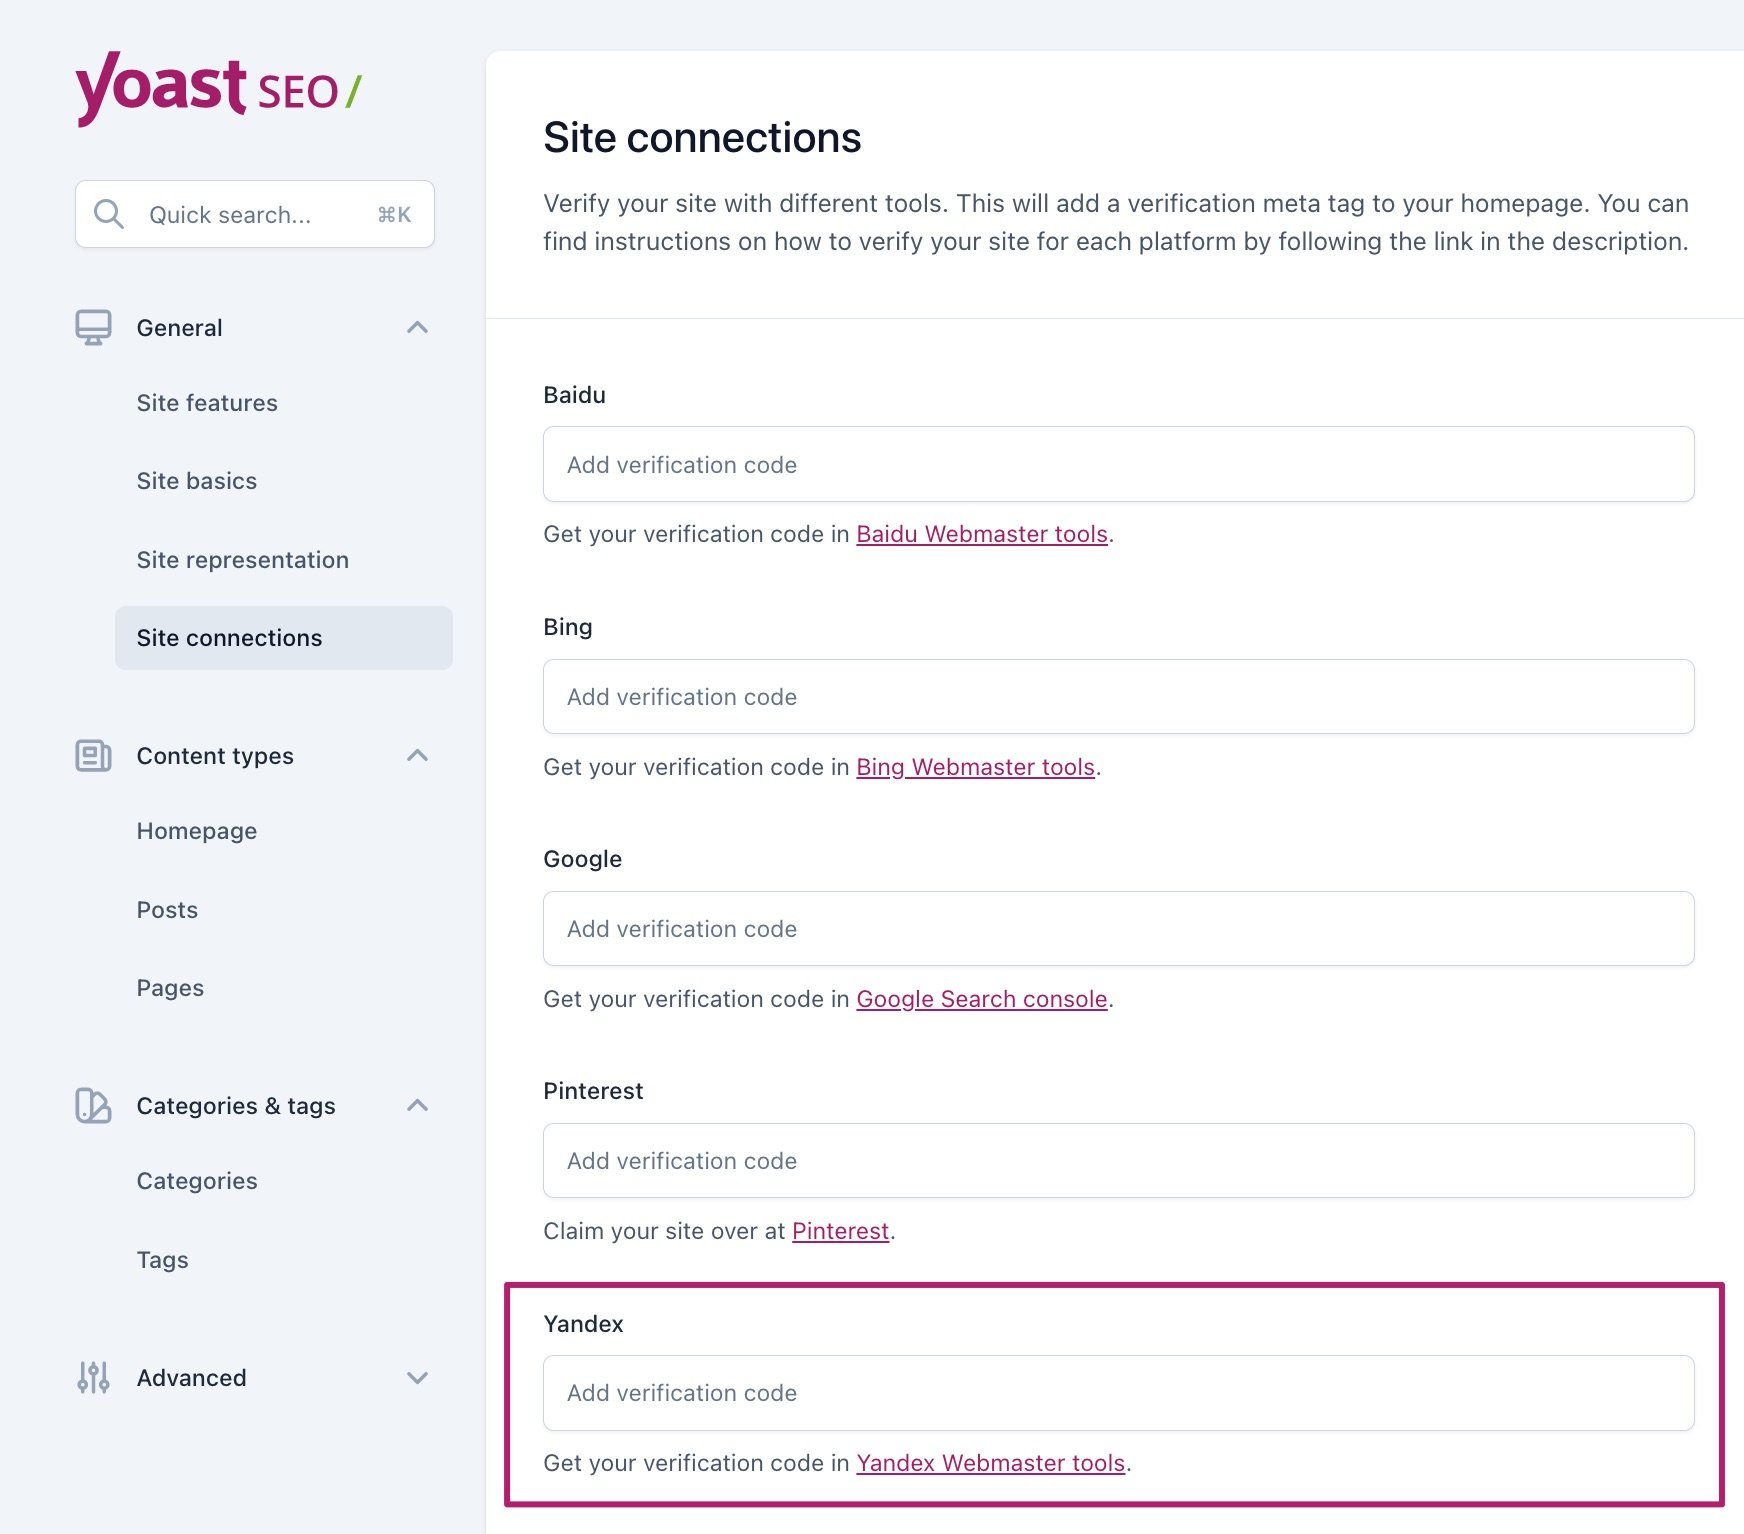 Screenshot highlighting the Yandex input field in the site connections menu item in Yoast SEO